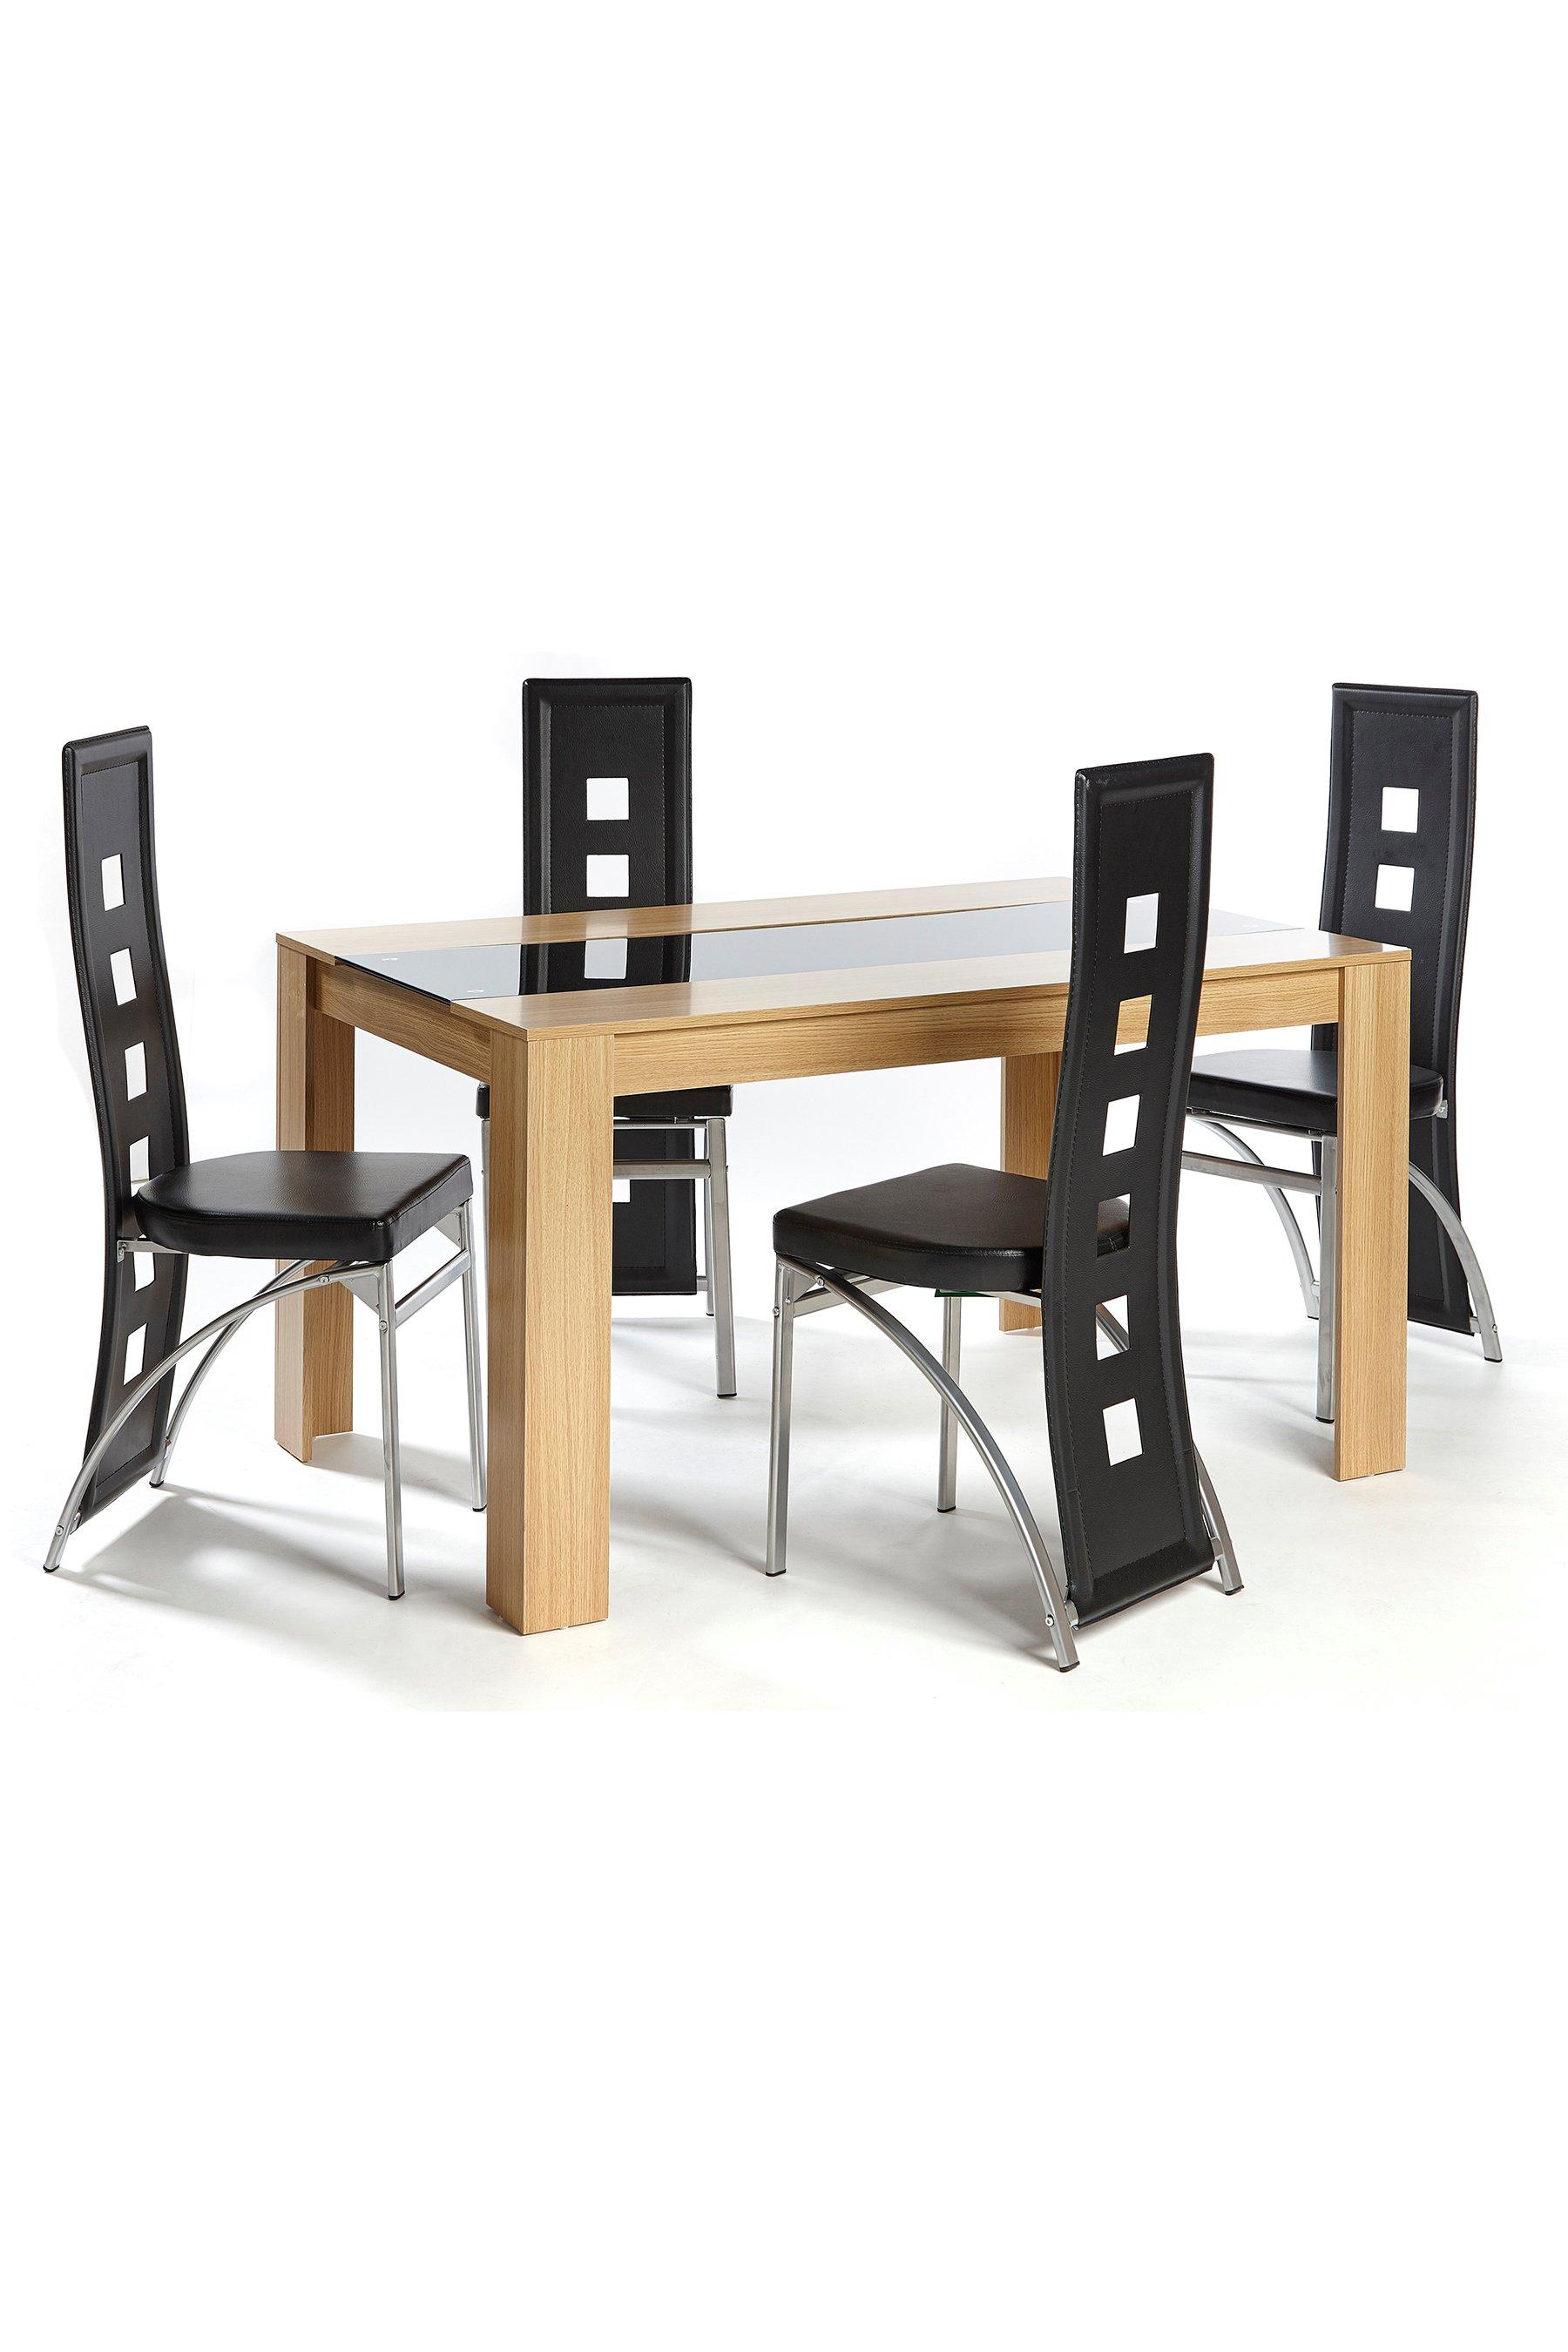 Image for Hudson 5-Piece Dining Set with Black Chairs from studio